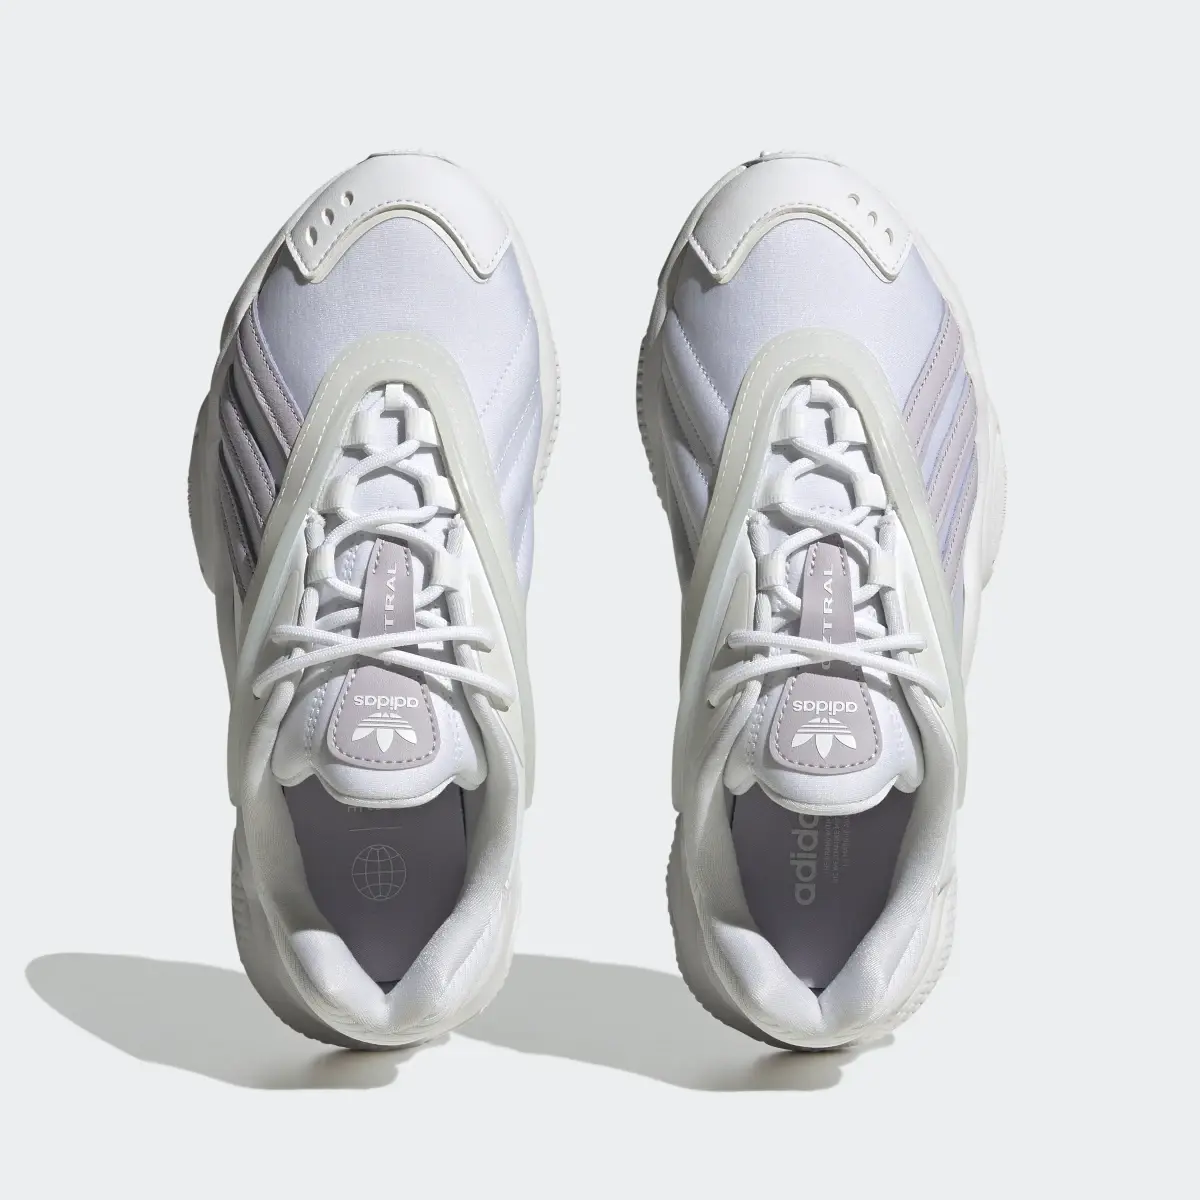 Adidas Oztral Shoes. 3